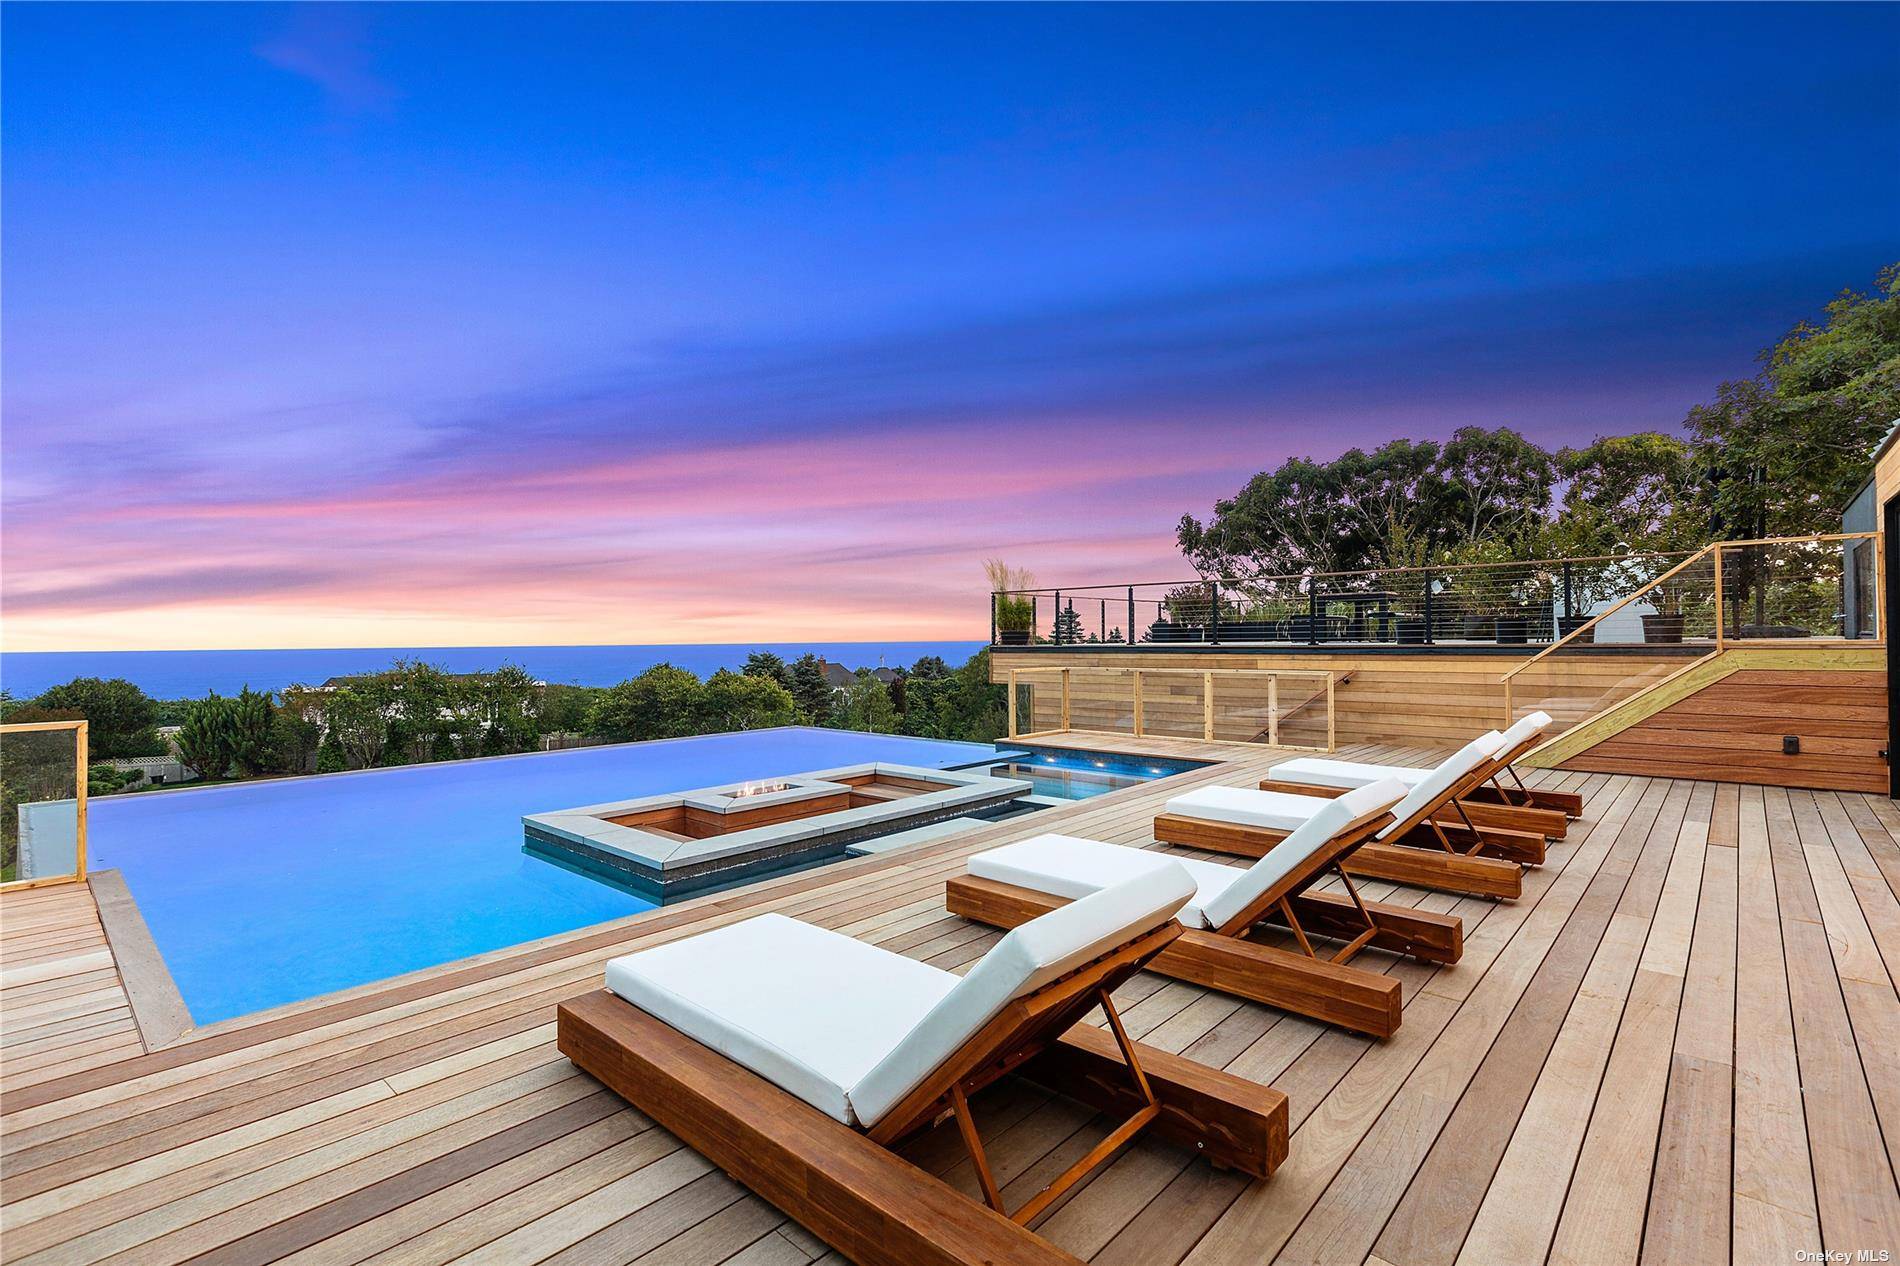 A Stunning Modern home with truly thrilling and captivating Ocean views.